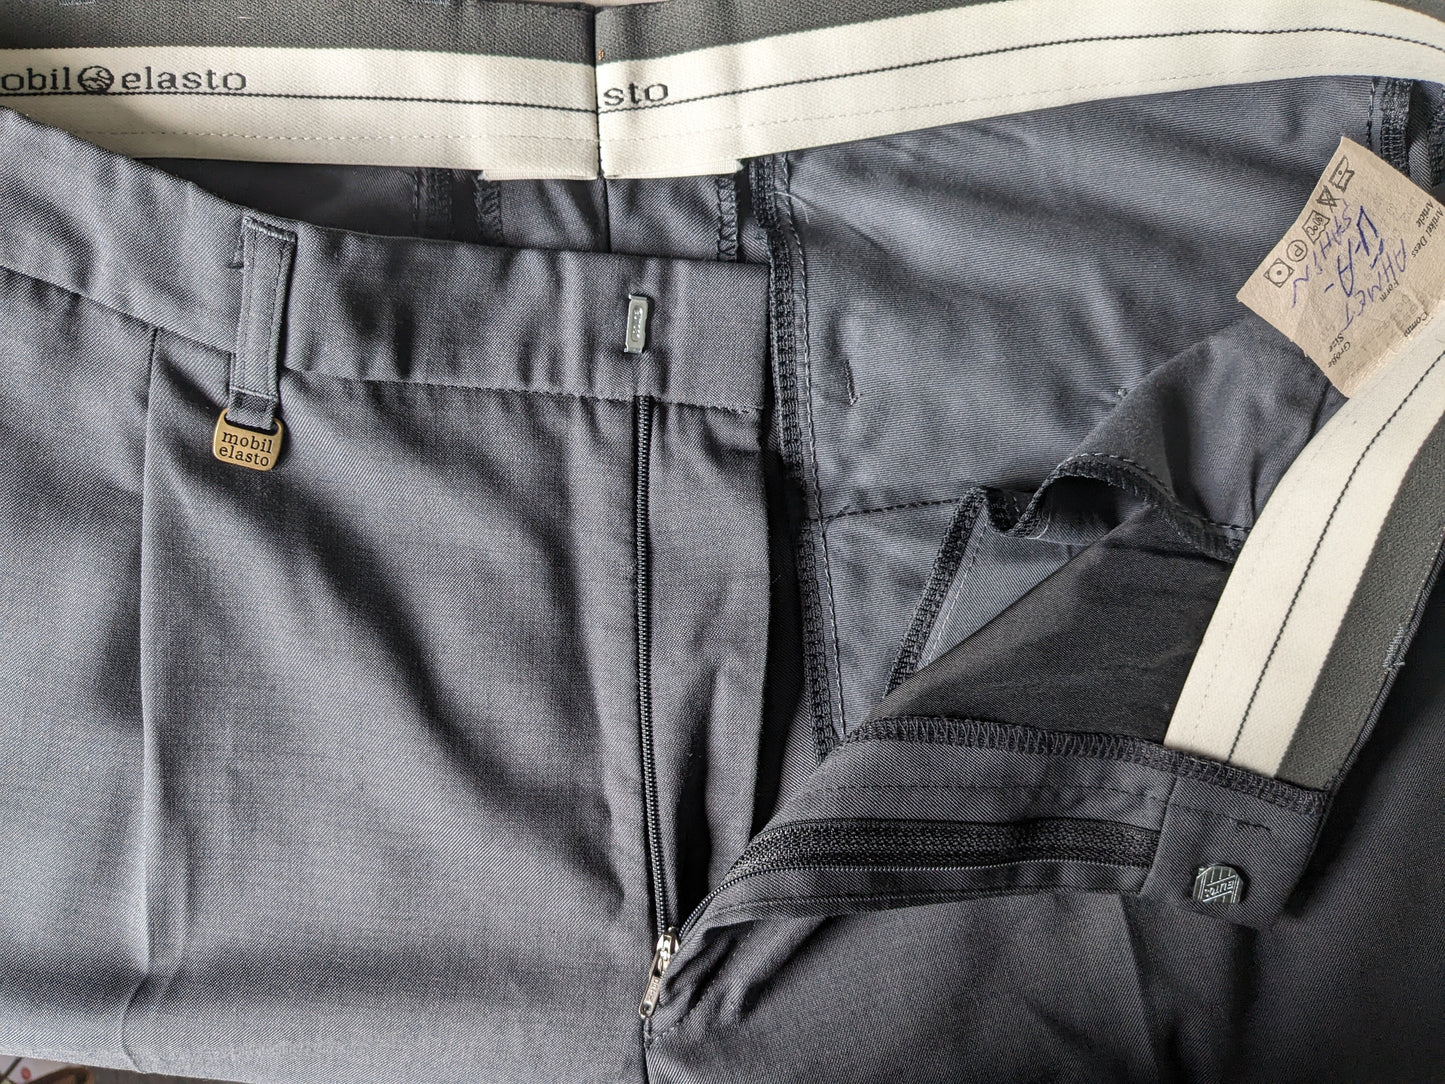 Mobil elasto trousers with cover. Dark gray motif. Size 52 / L.